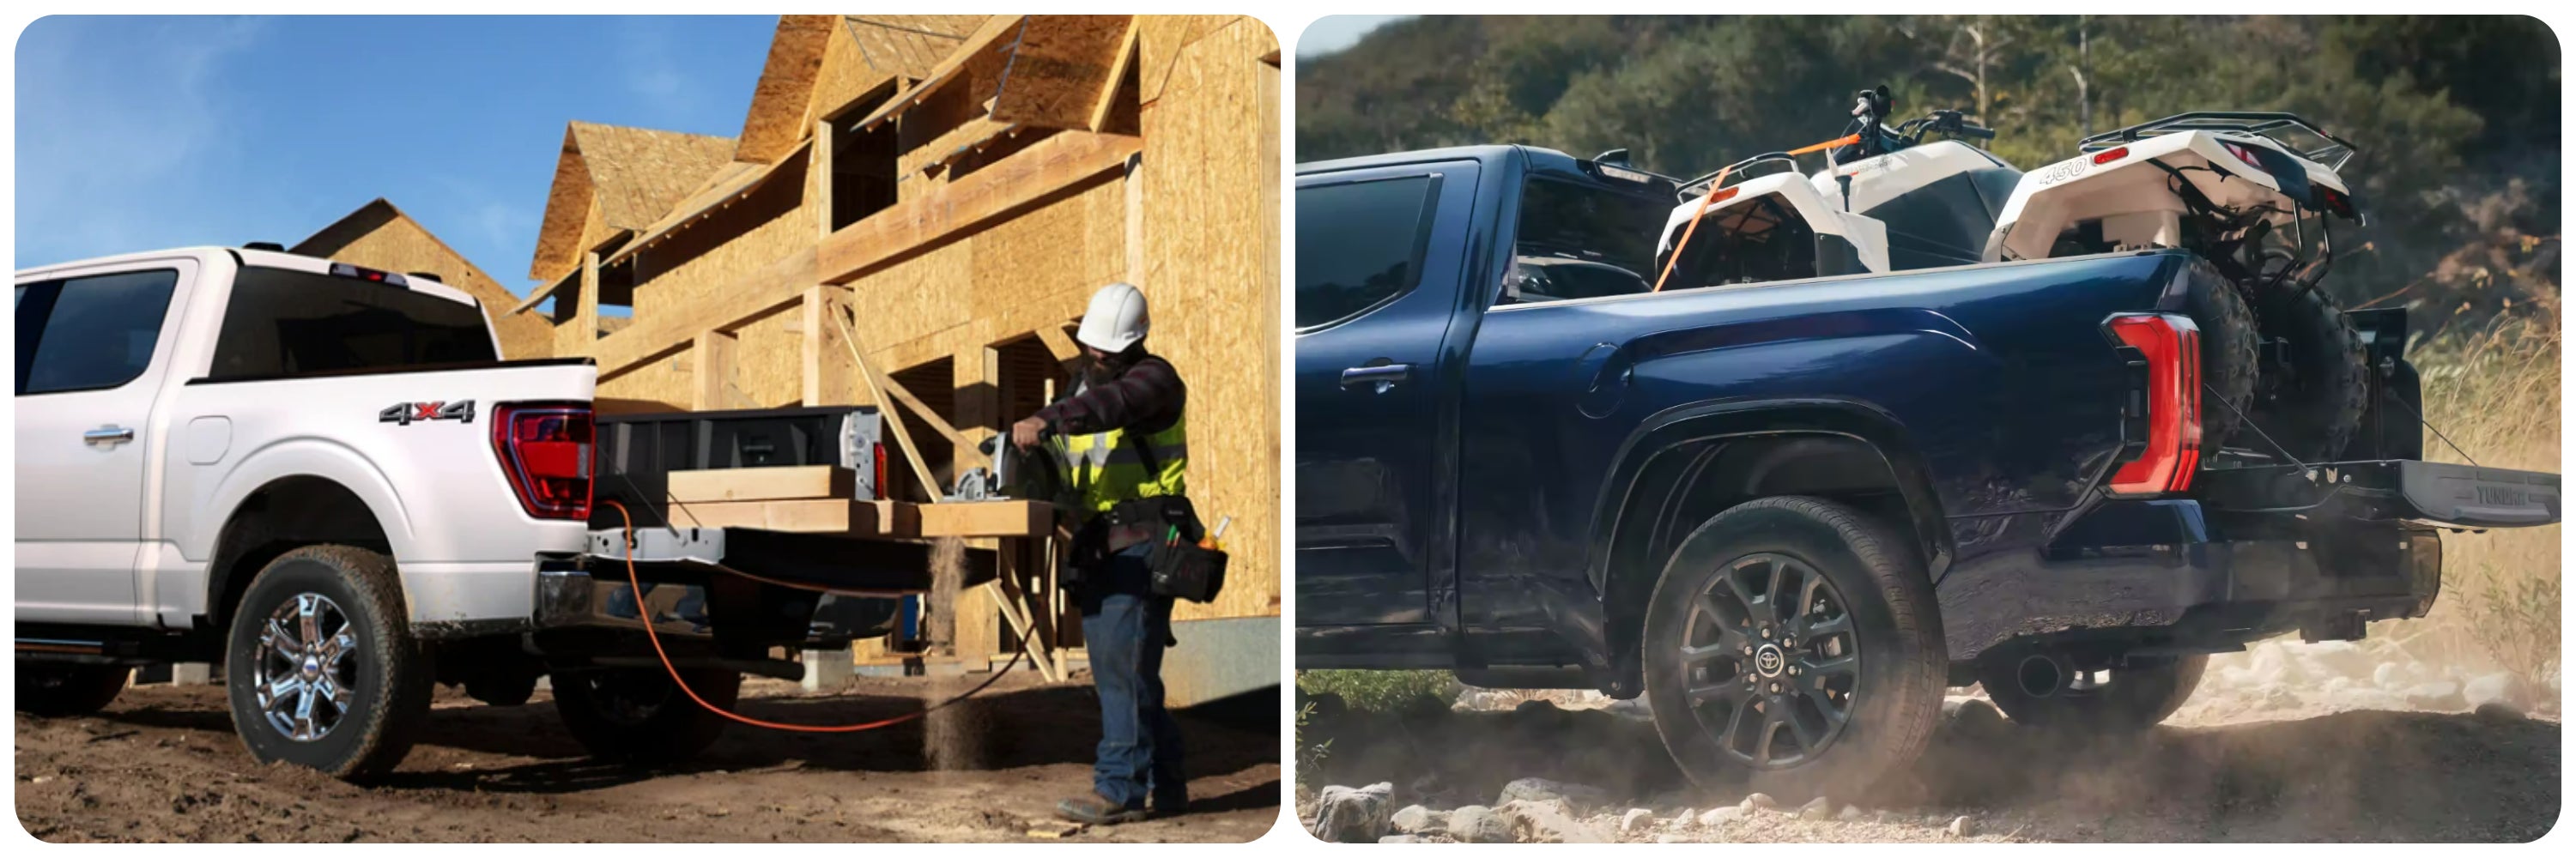 On the left the bed of a white 2023 Ford F-150 is used as a workbench at a construction site, on the right a view of a blue 2023 Toyota Tundra loaded with 4-wheelers